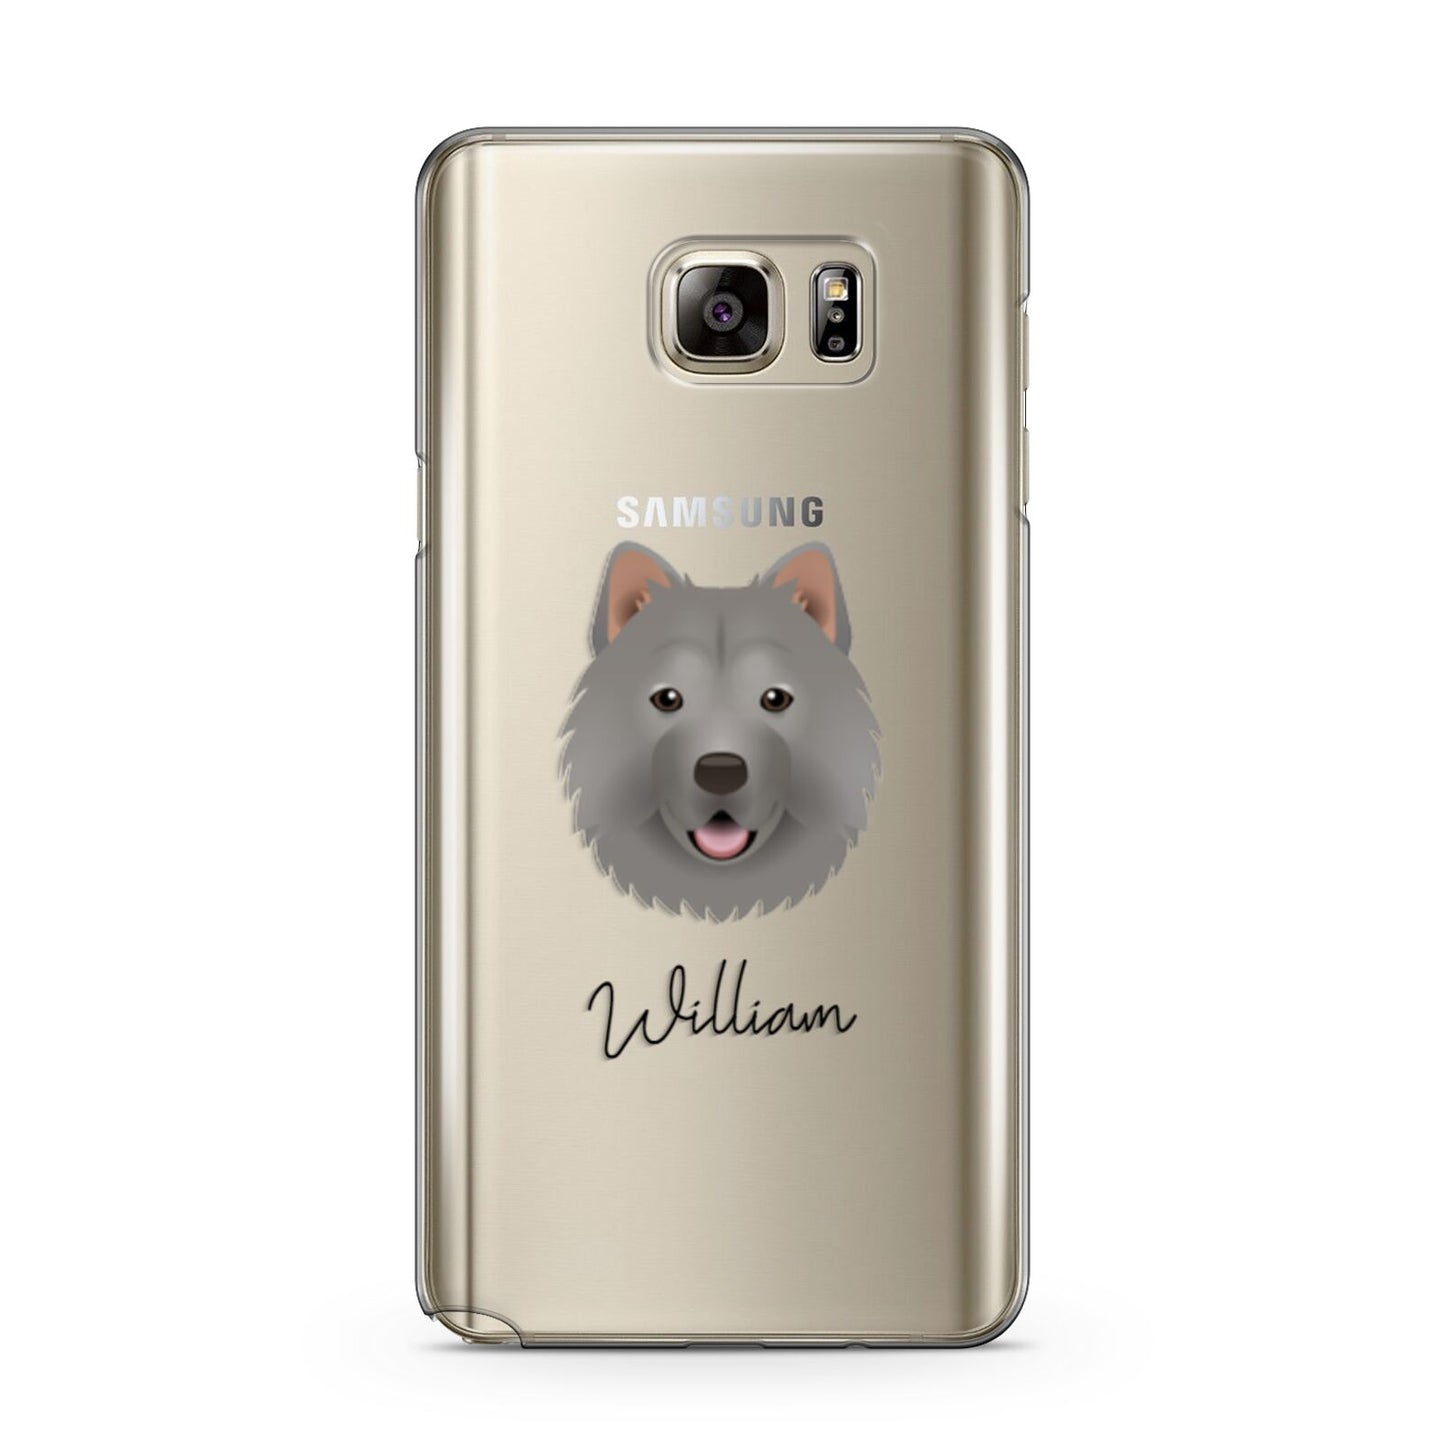 Chusky Personalised Samsung Galaxy Note 5 Case